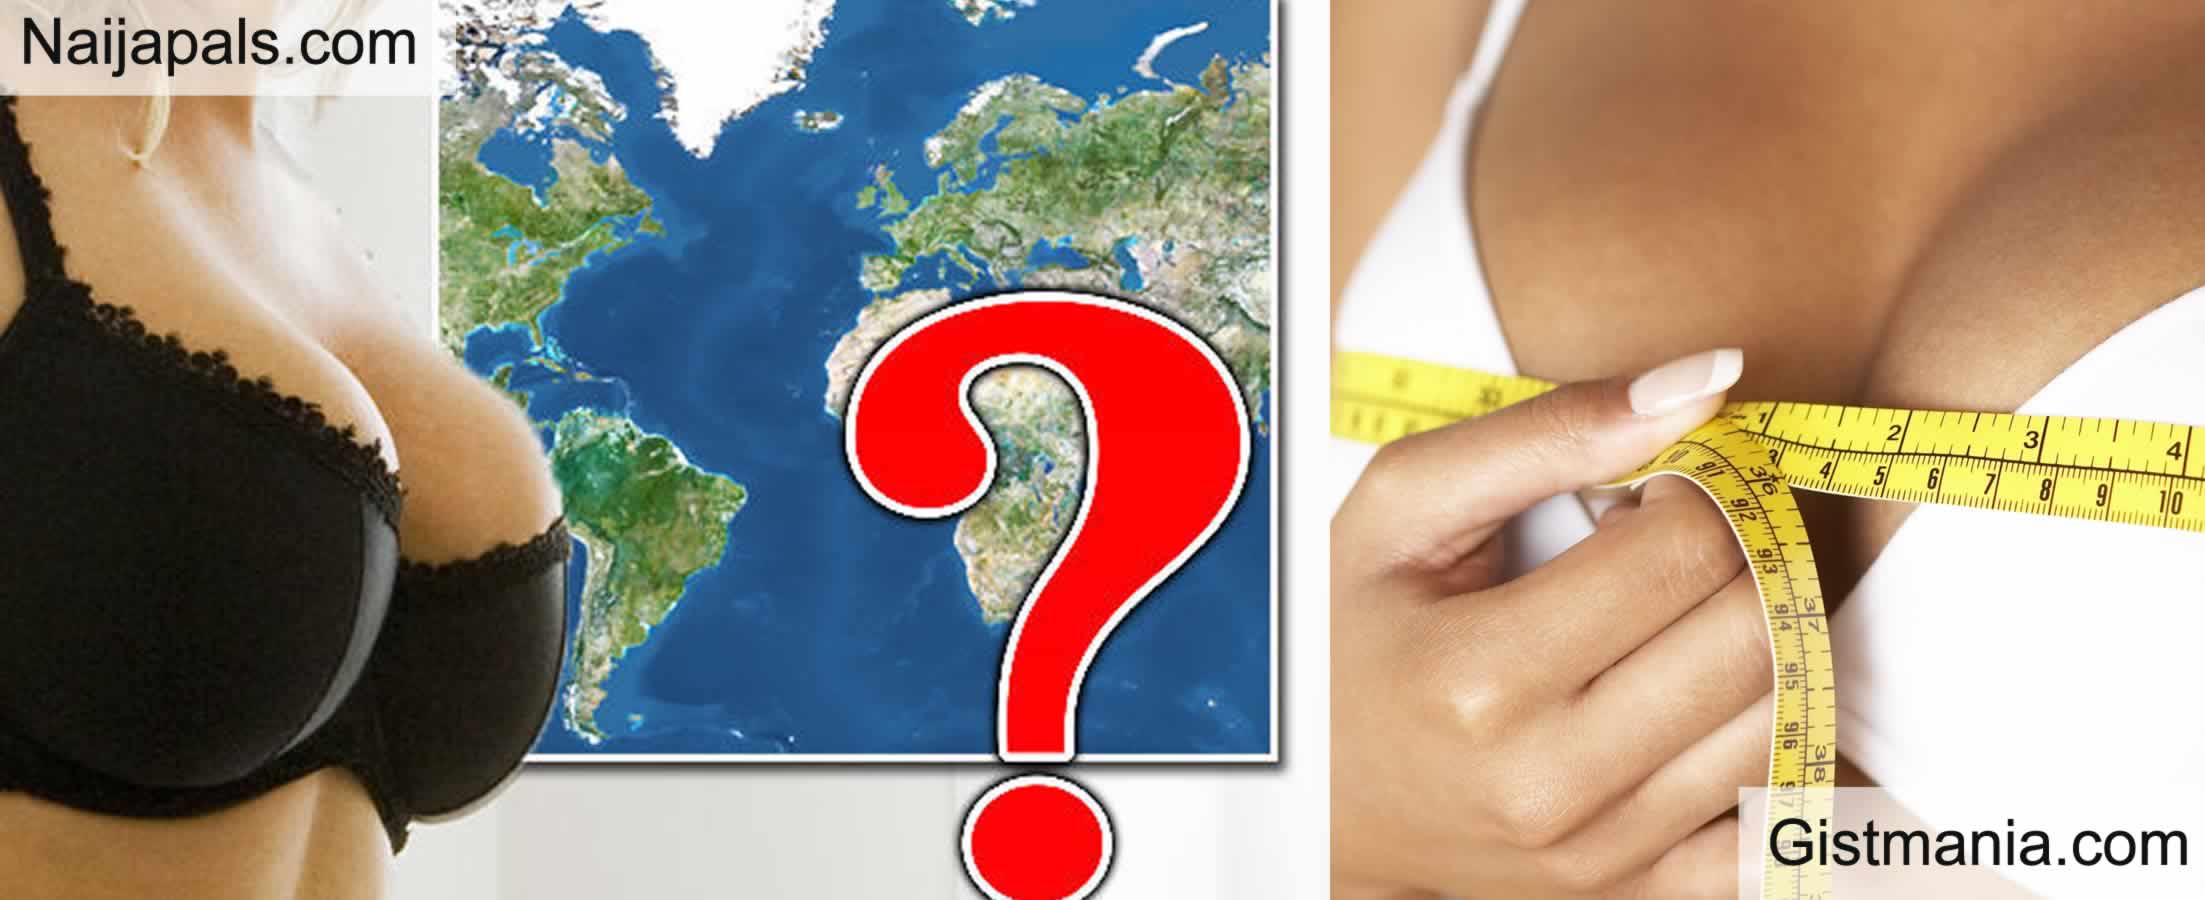 List Of Countries With The Biggest B00bs in The World, Nigeria Not on The  List - Gistmania